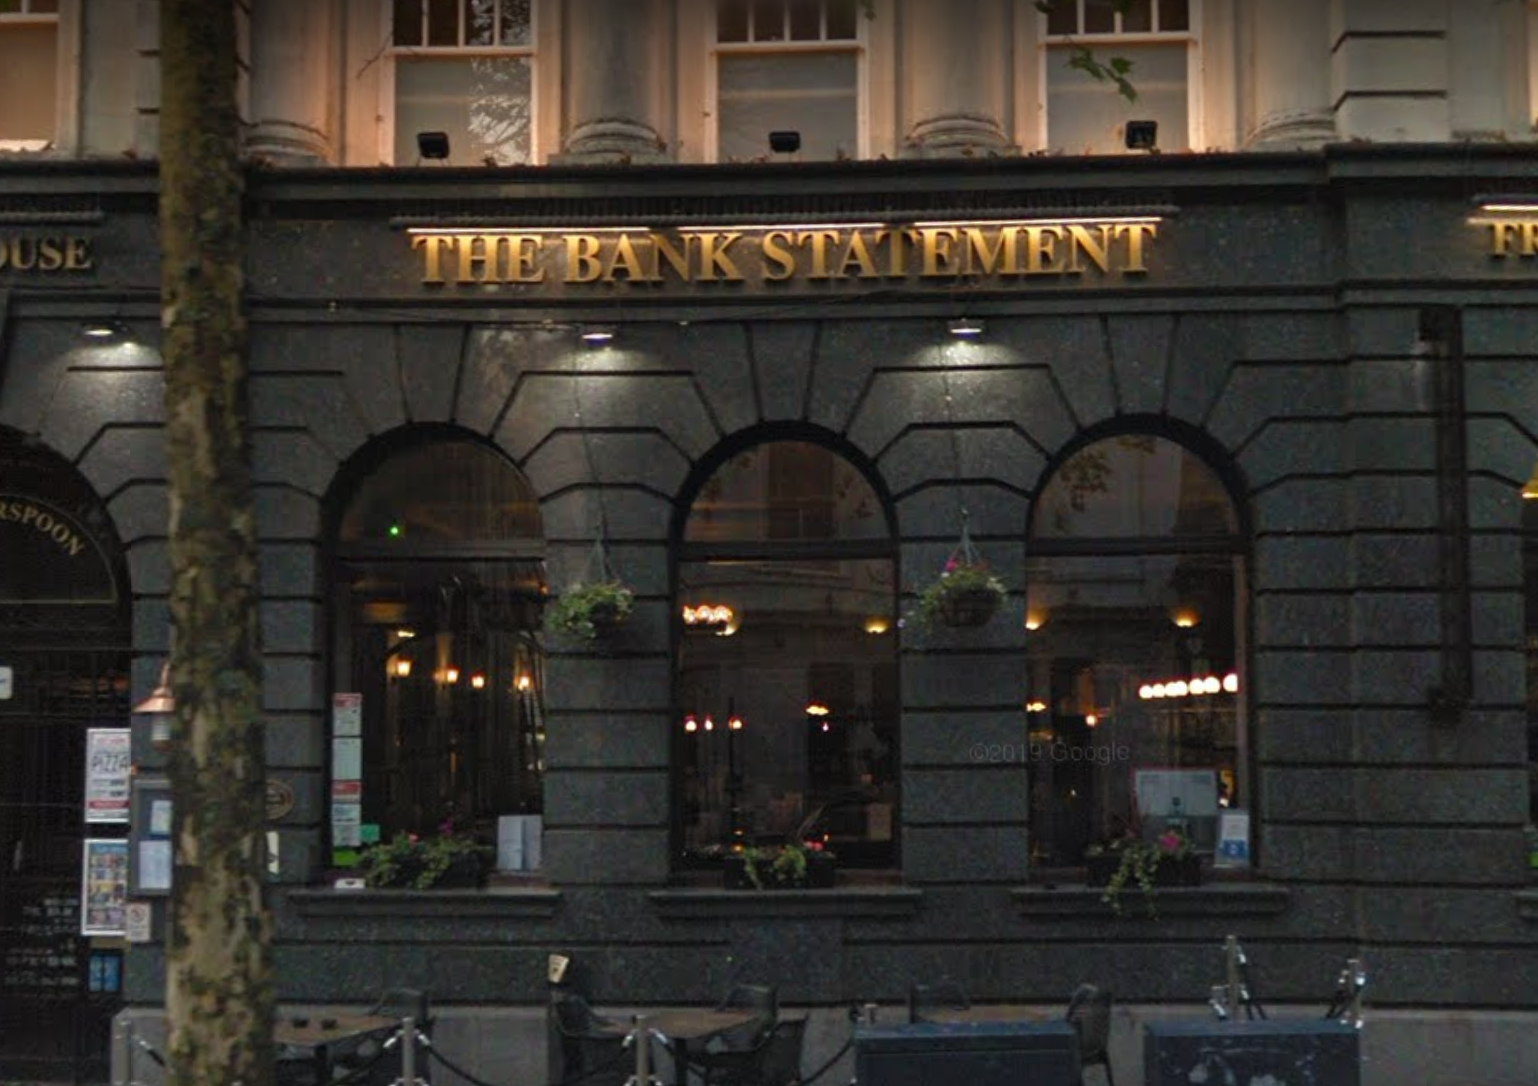 Eight employees at the Bank Statement pub in Swansea have tested positive for Covid -19